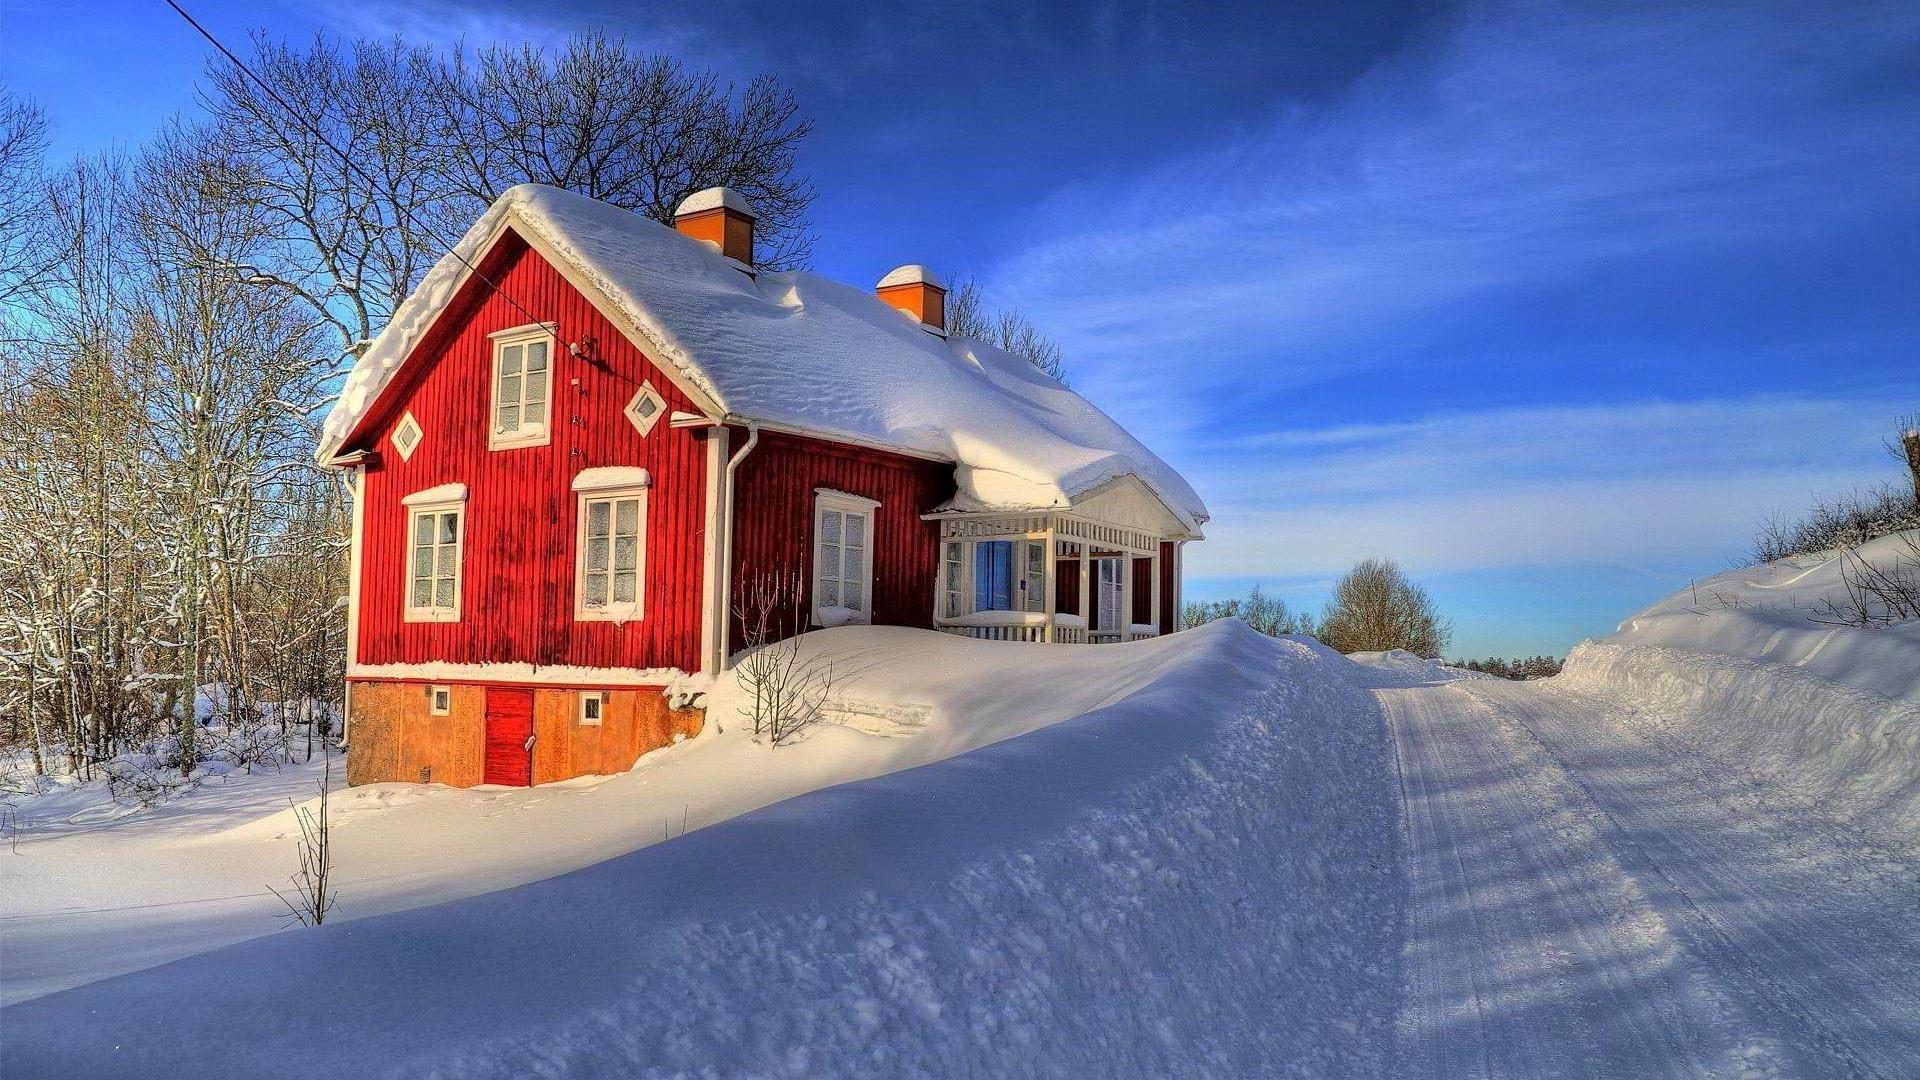 architecture, House, Window, Snow, Winter, Road, Trees